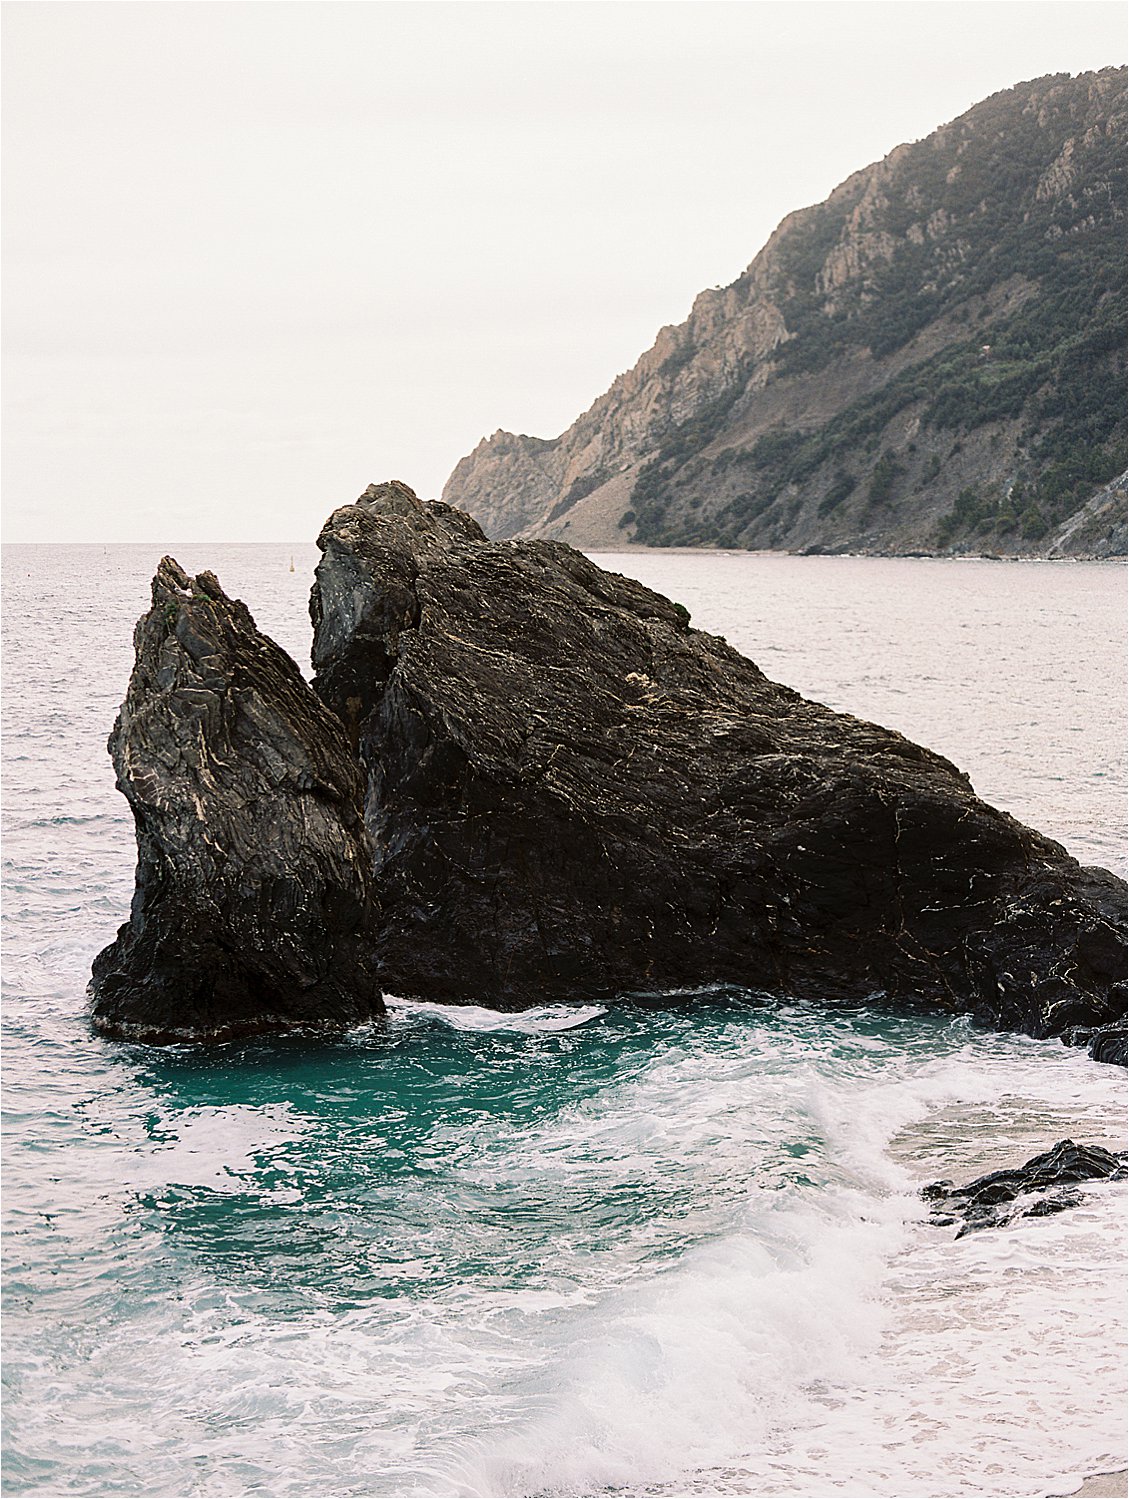 Waterfront in Monterosso al Mare, Cinque Terre, Italy on film with destination wedding film photographer Renee Hollingshead